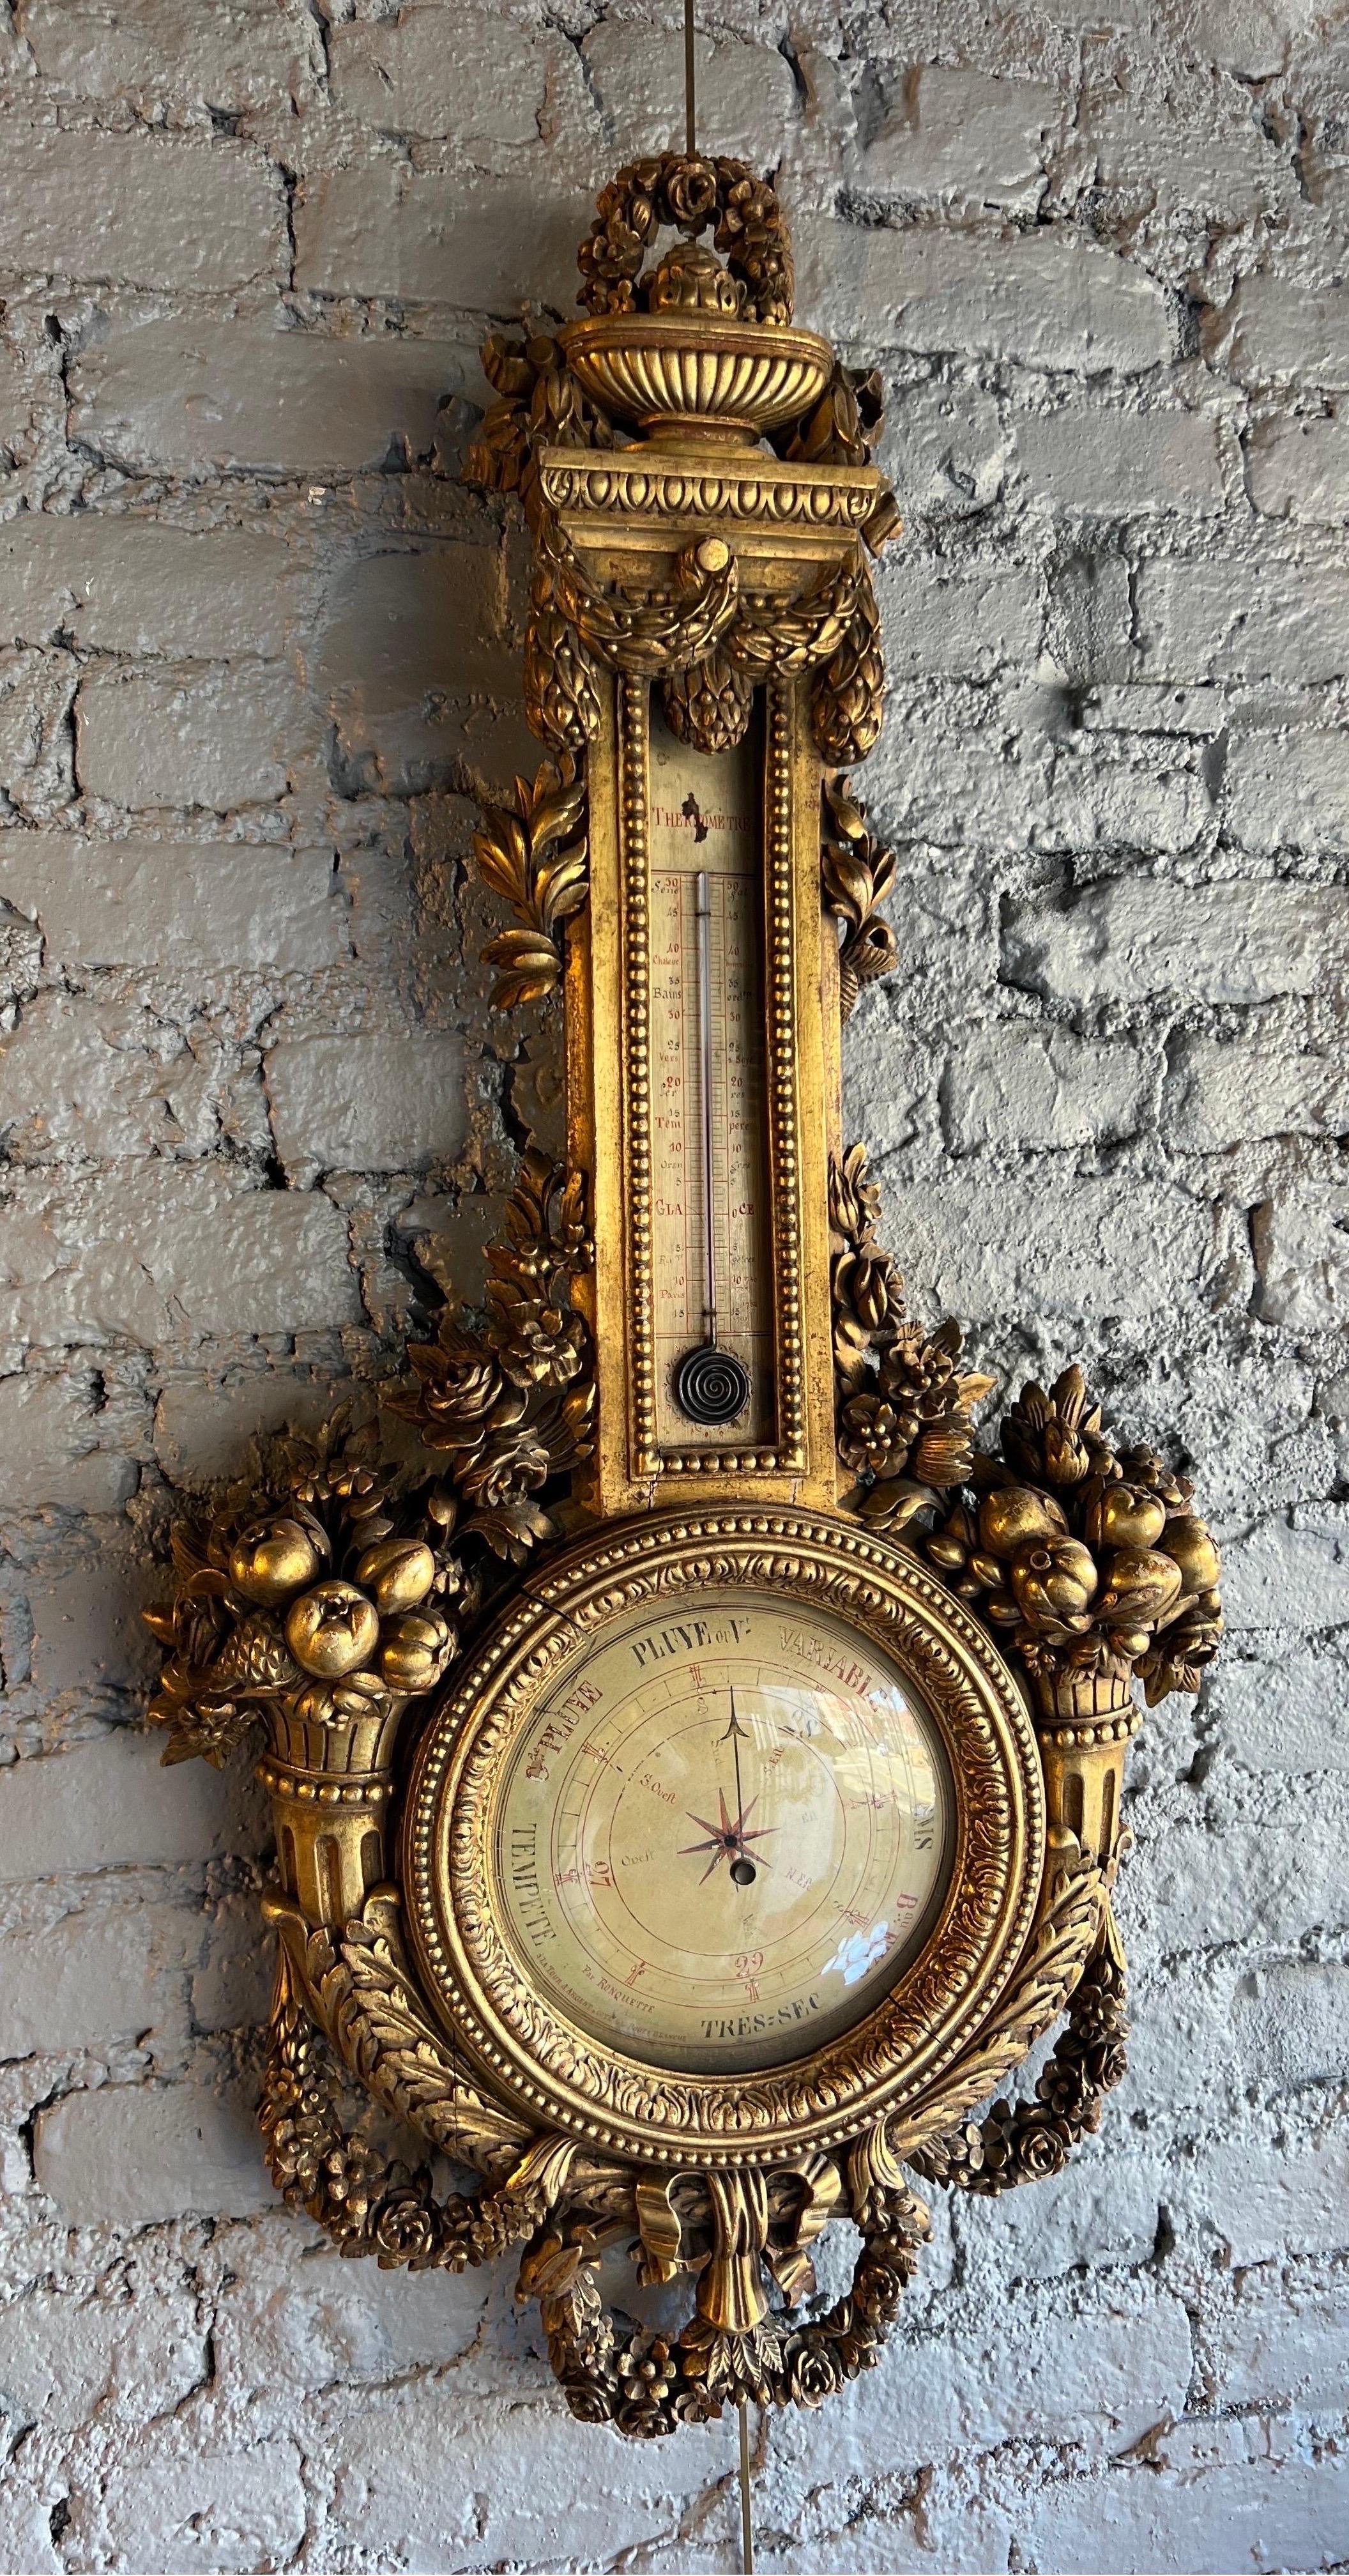 19th Century French giltwood barometer with working thermometer. Well executed carvings of scrolls, swags and bounty all finished in gold gilding. Great example of a classic French barometer.